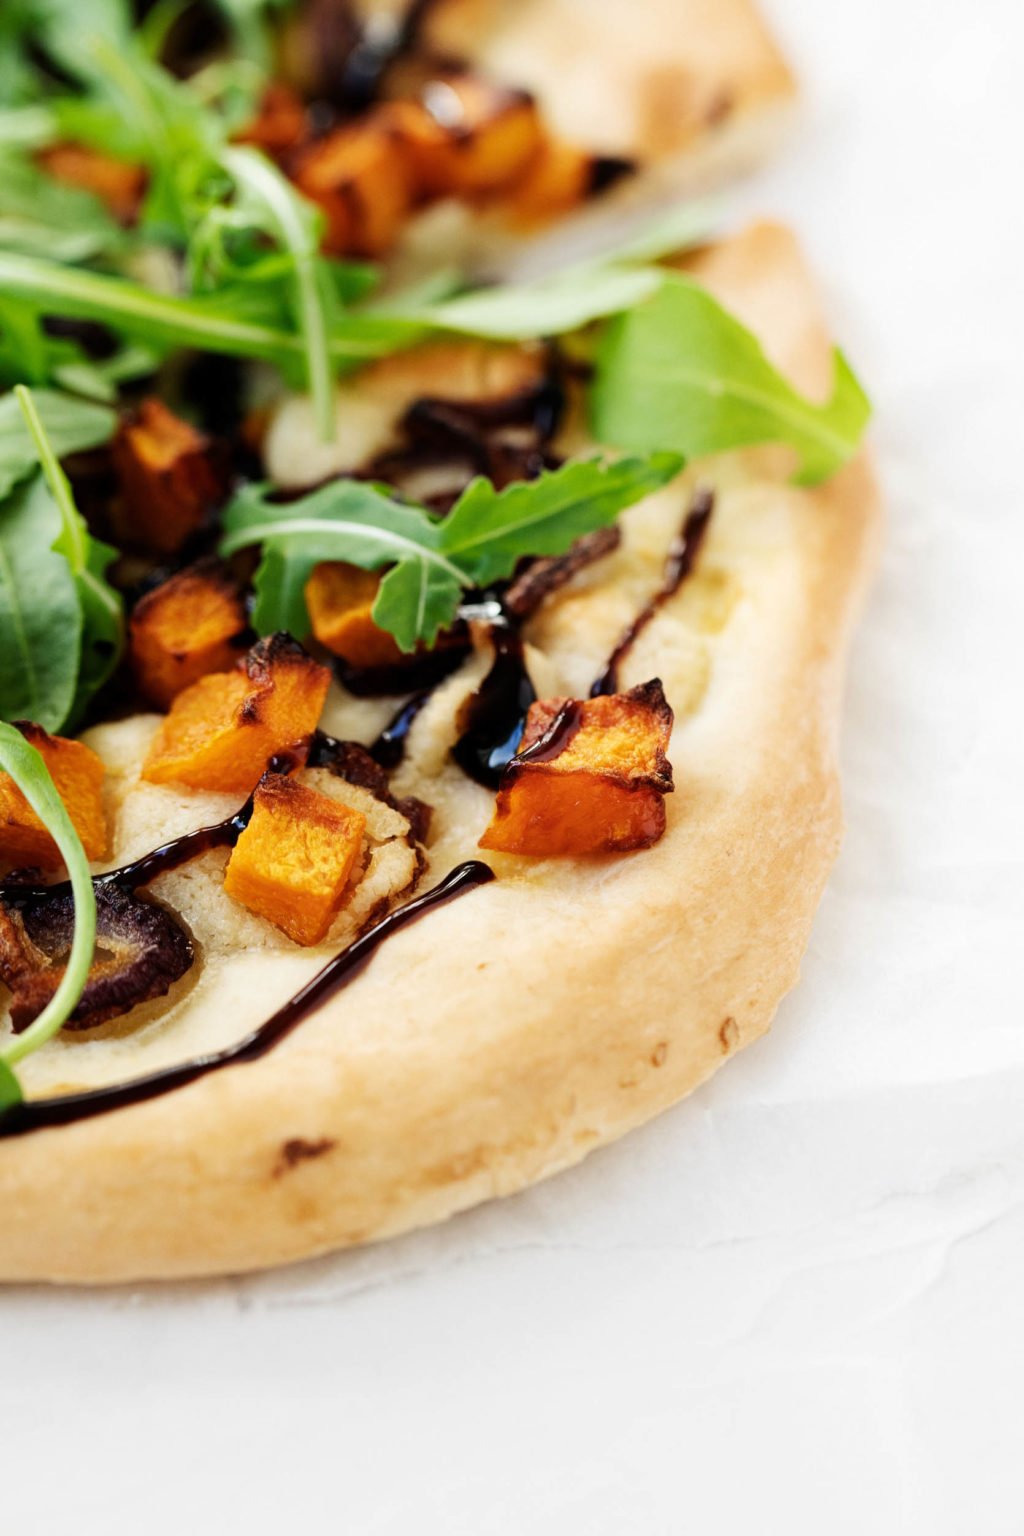 Zoomed in on an autumnal vegan pizza, made with roasted butternut squash, caramelized red onion, and arugula.